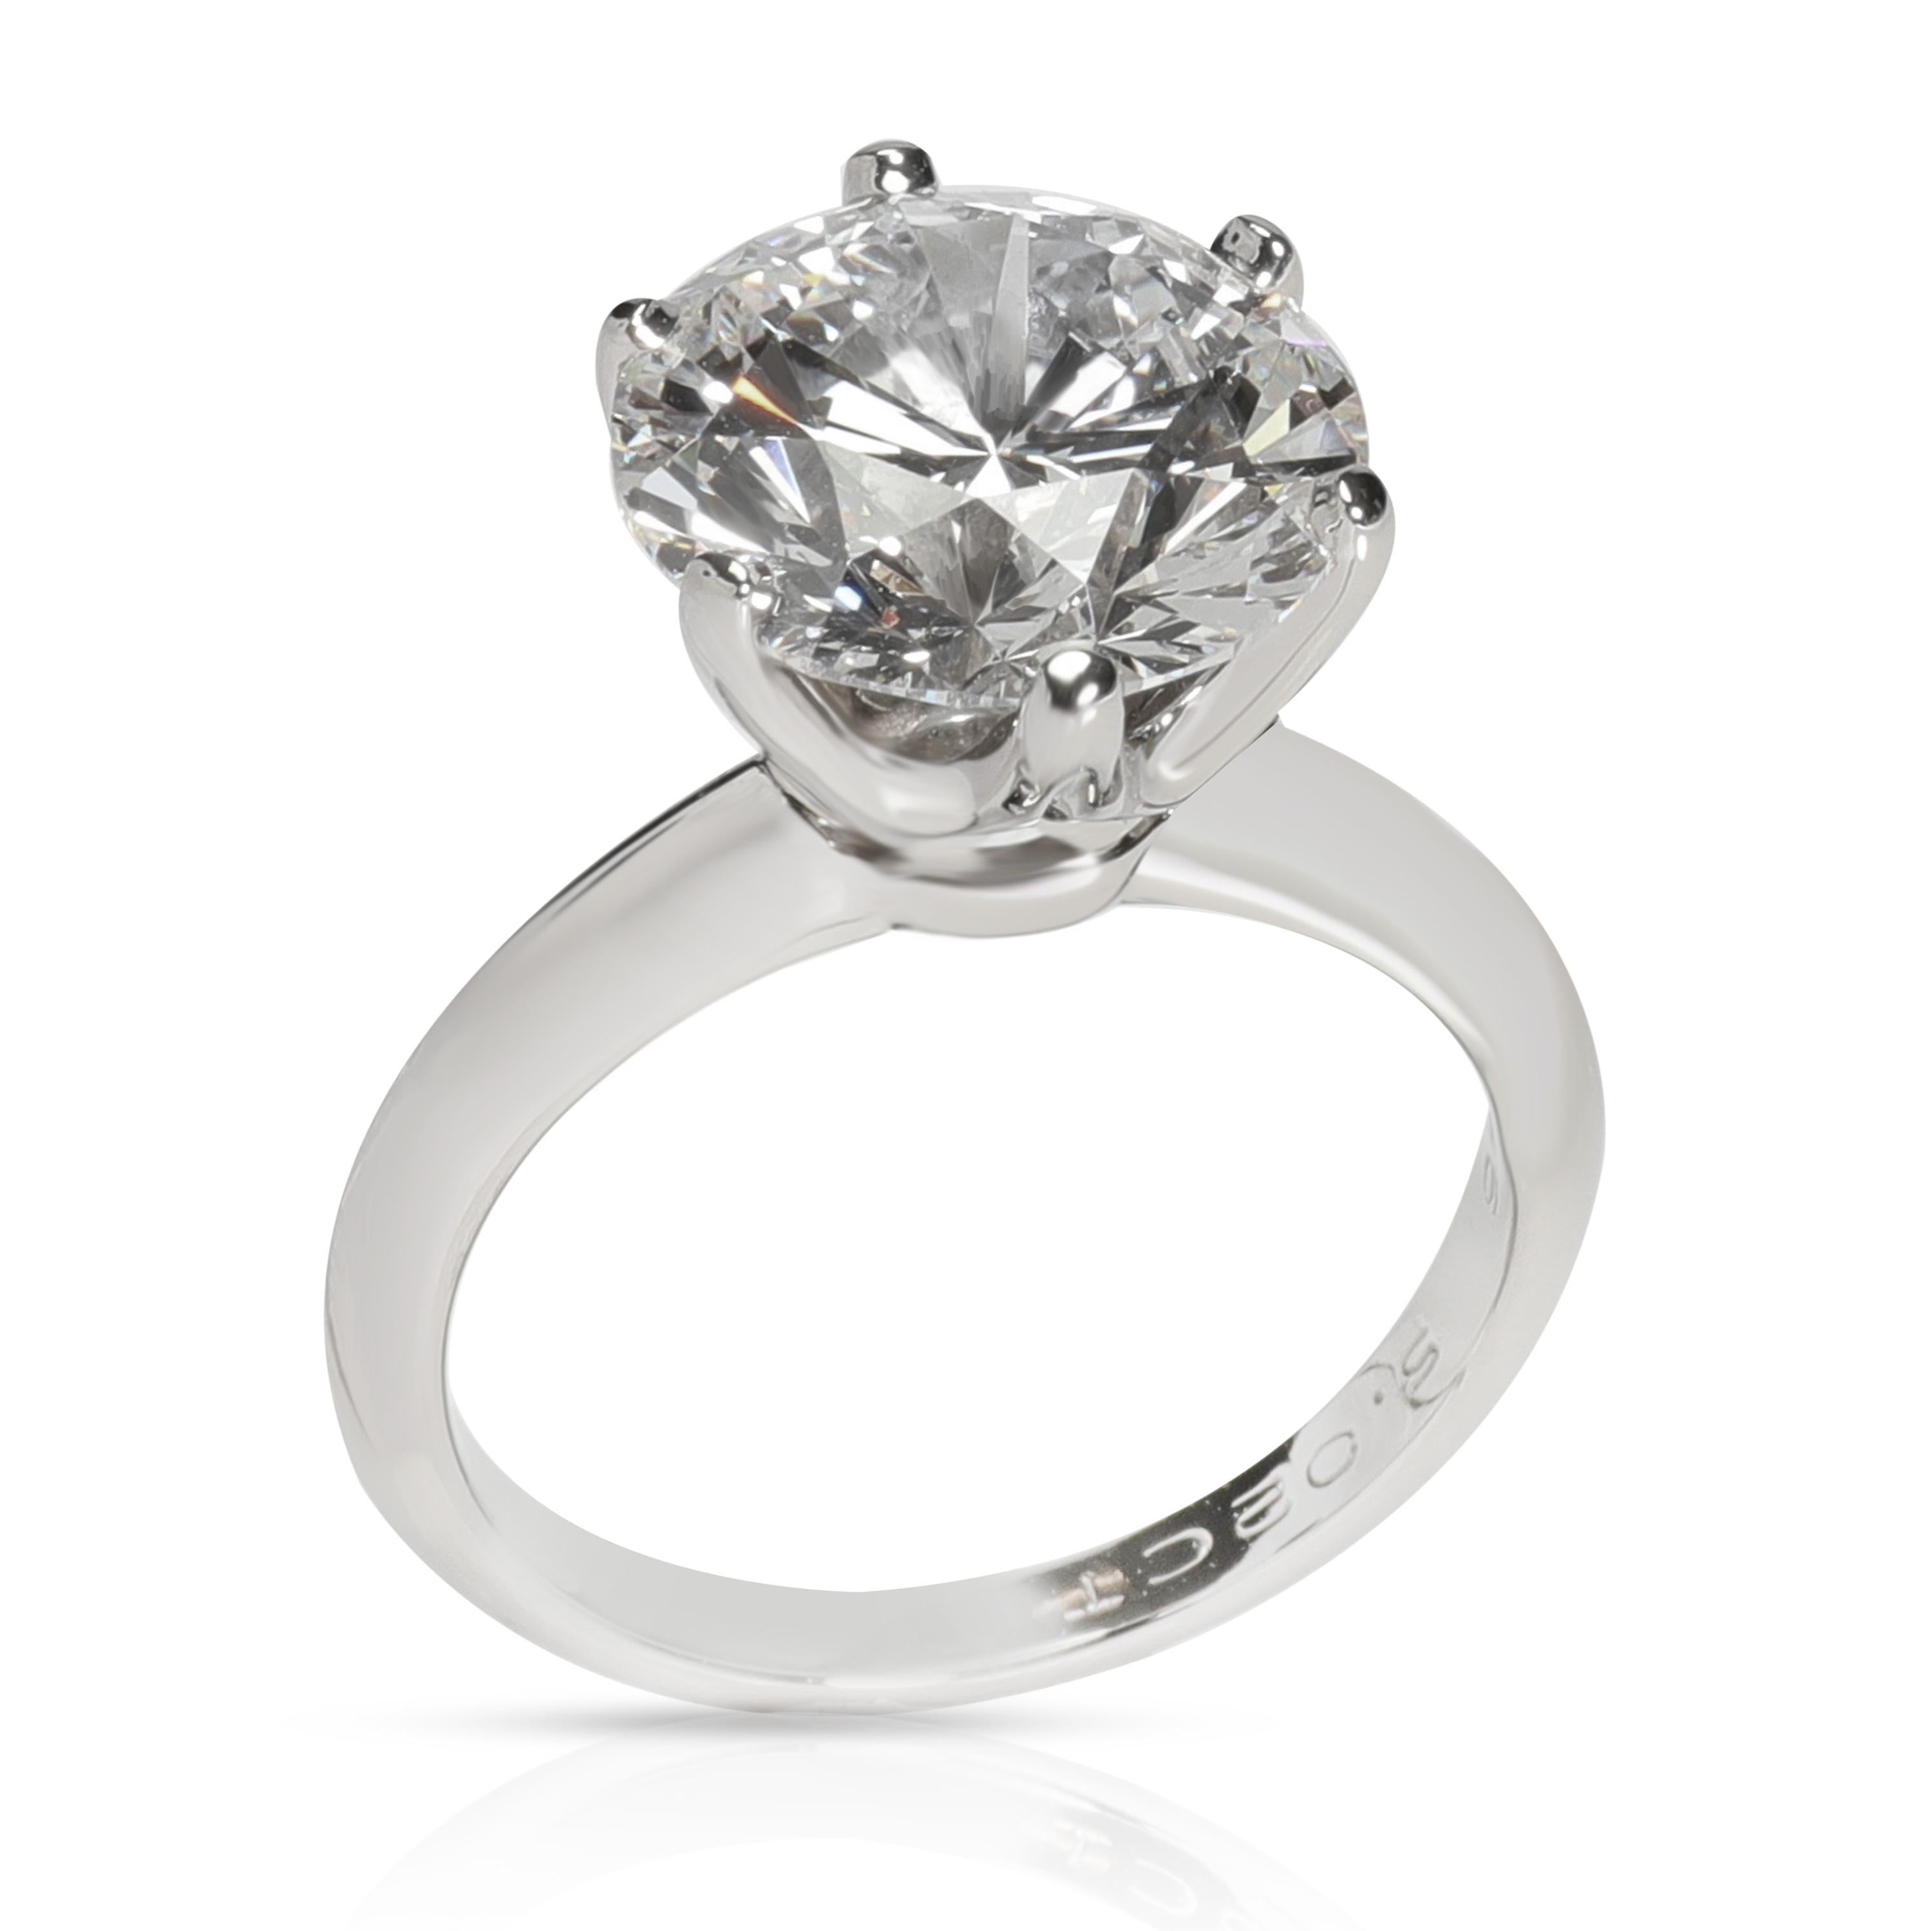 Tiffany & Co. Solitaire Diamond Engagement Ring in Platinum D VS1 5.02 CT
SKU: 106943

Retails for $647,000. In excellent condition and recently polished. Ring size is 6. Comes with the original Tiffany box and papers.

Brand: Tiffany &